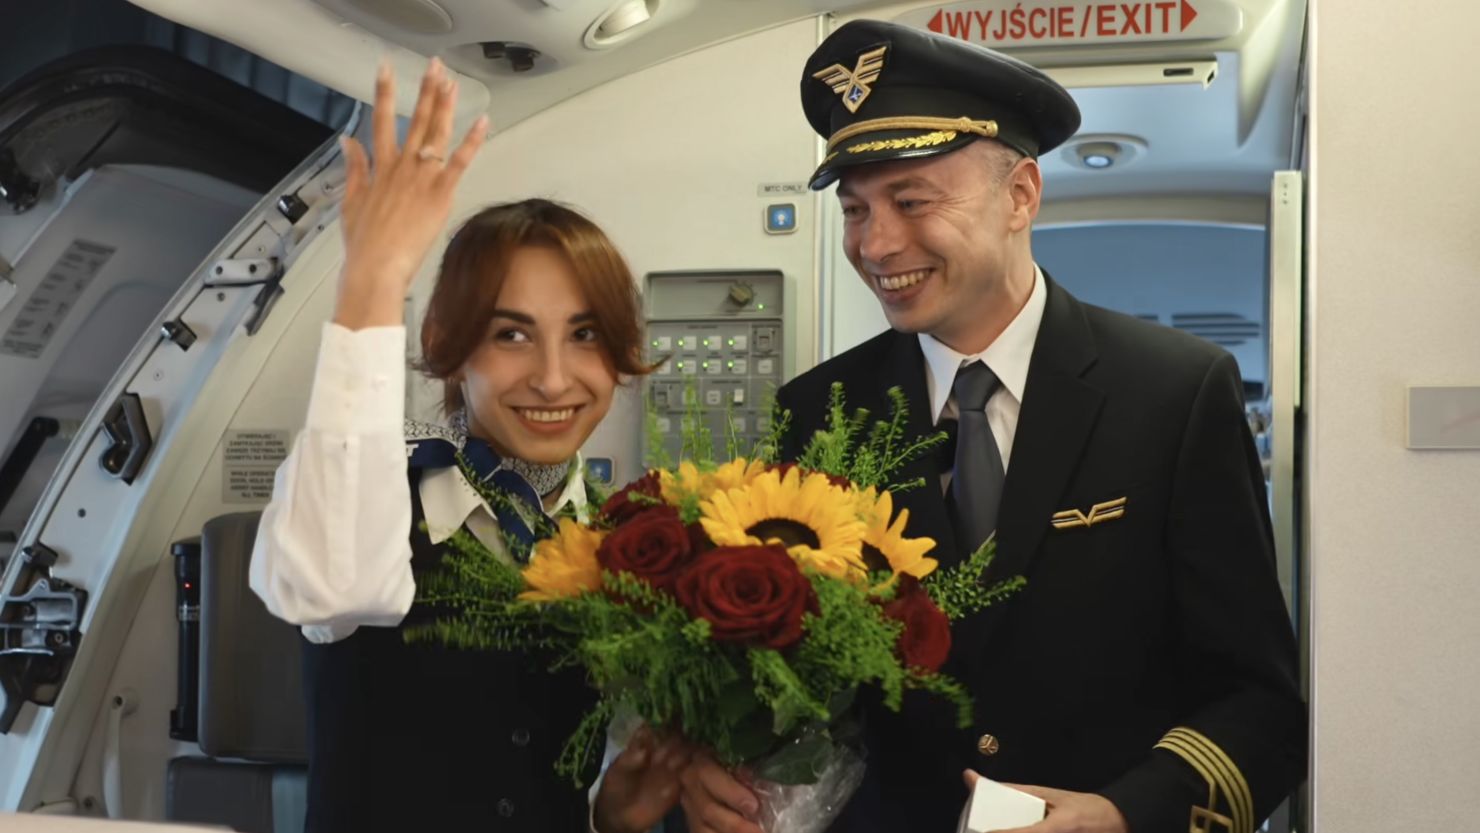 A captain proposed to a flight attendant aboard a flight to Kraków, Poland.